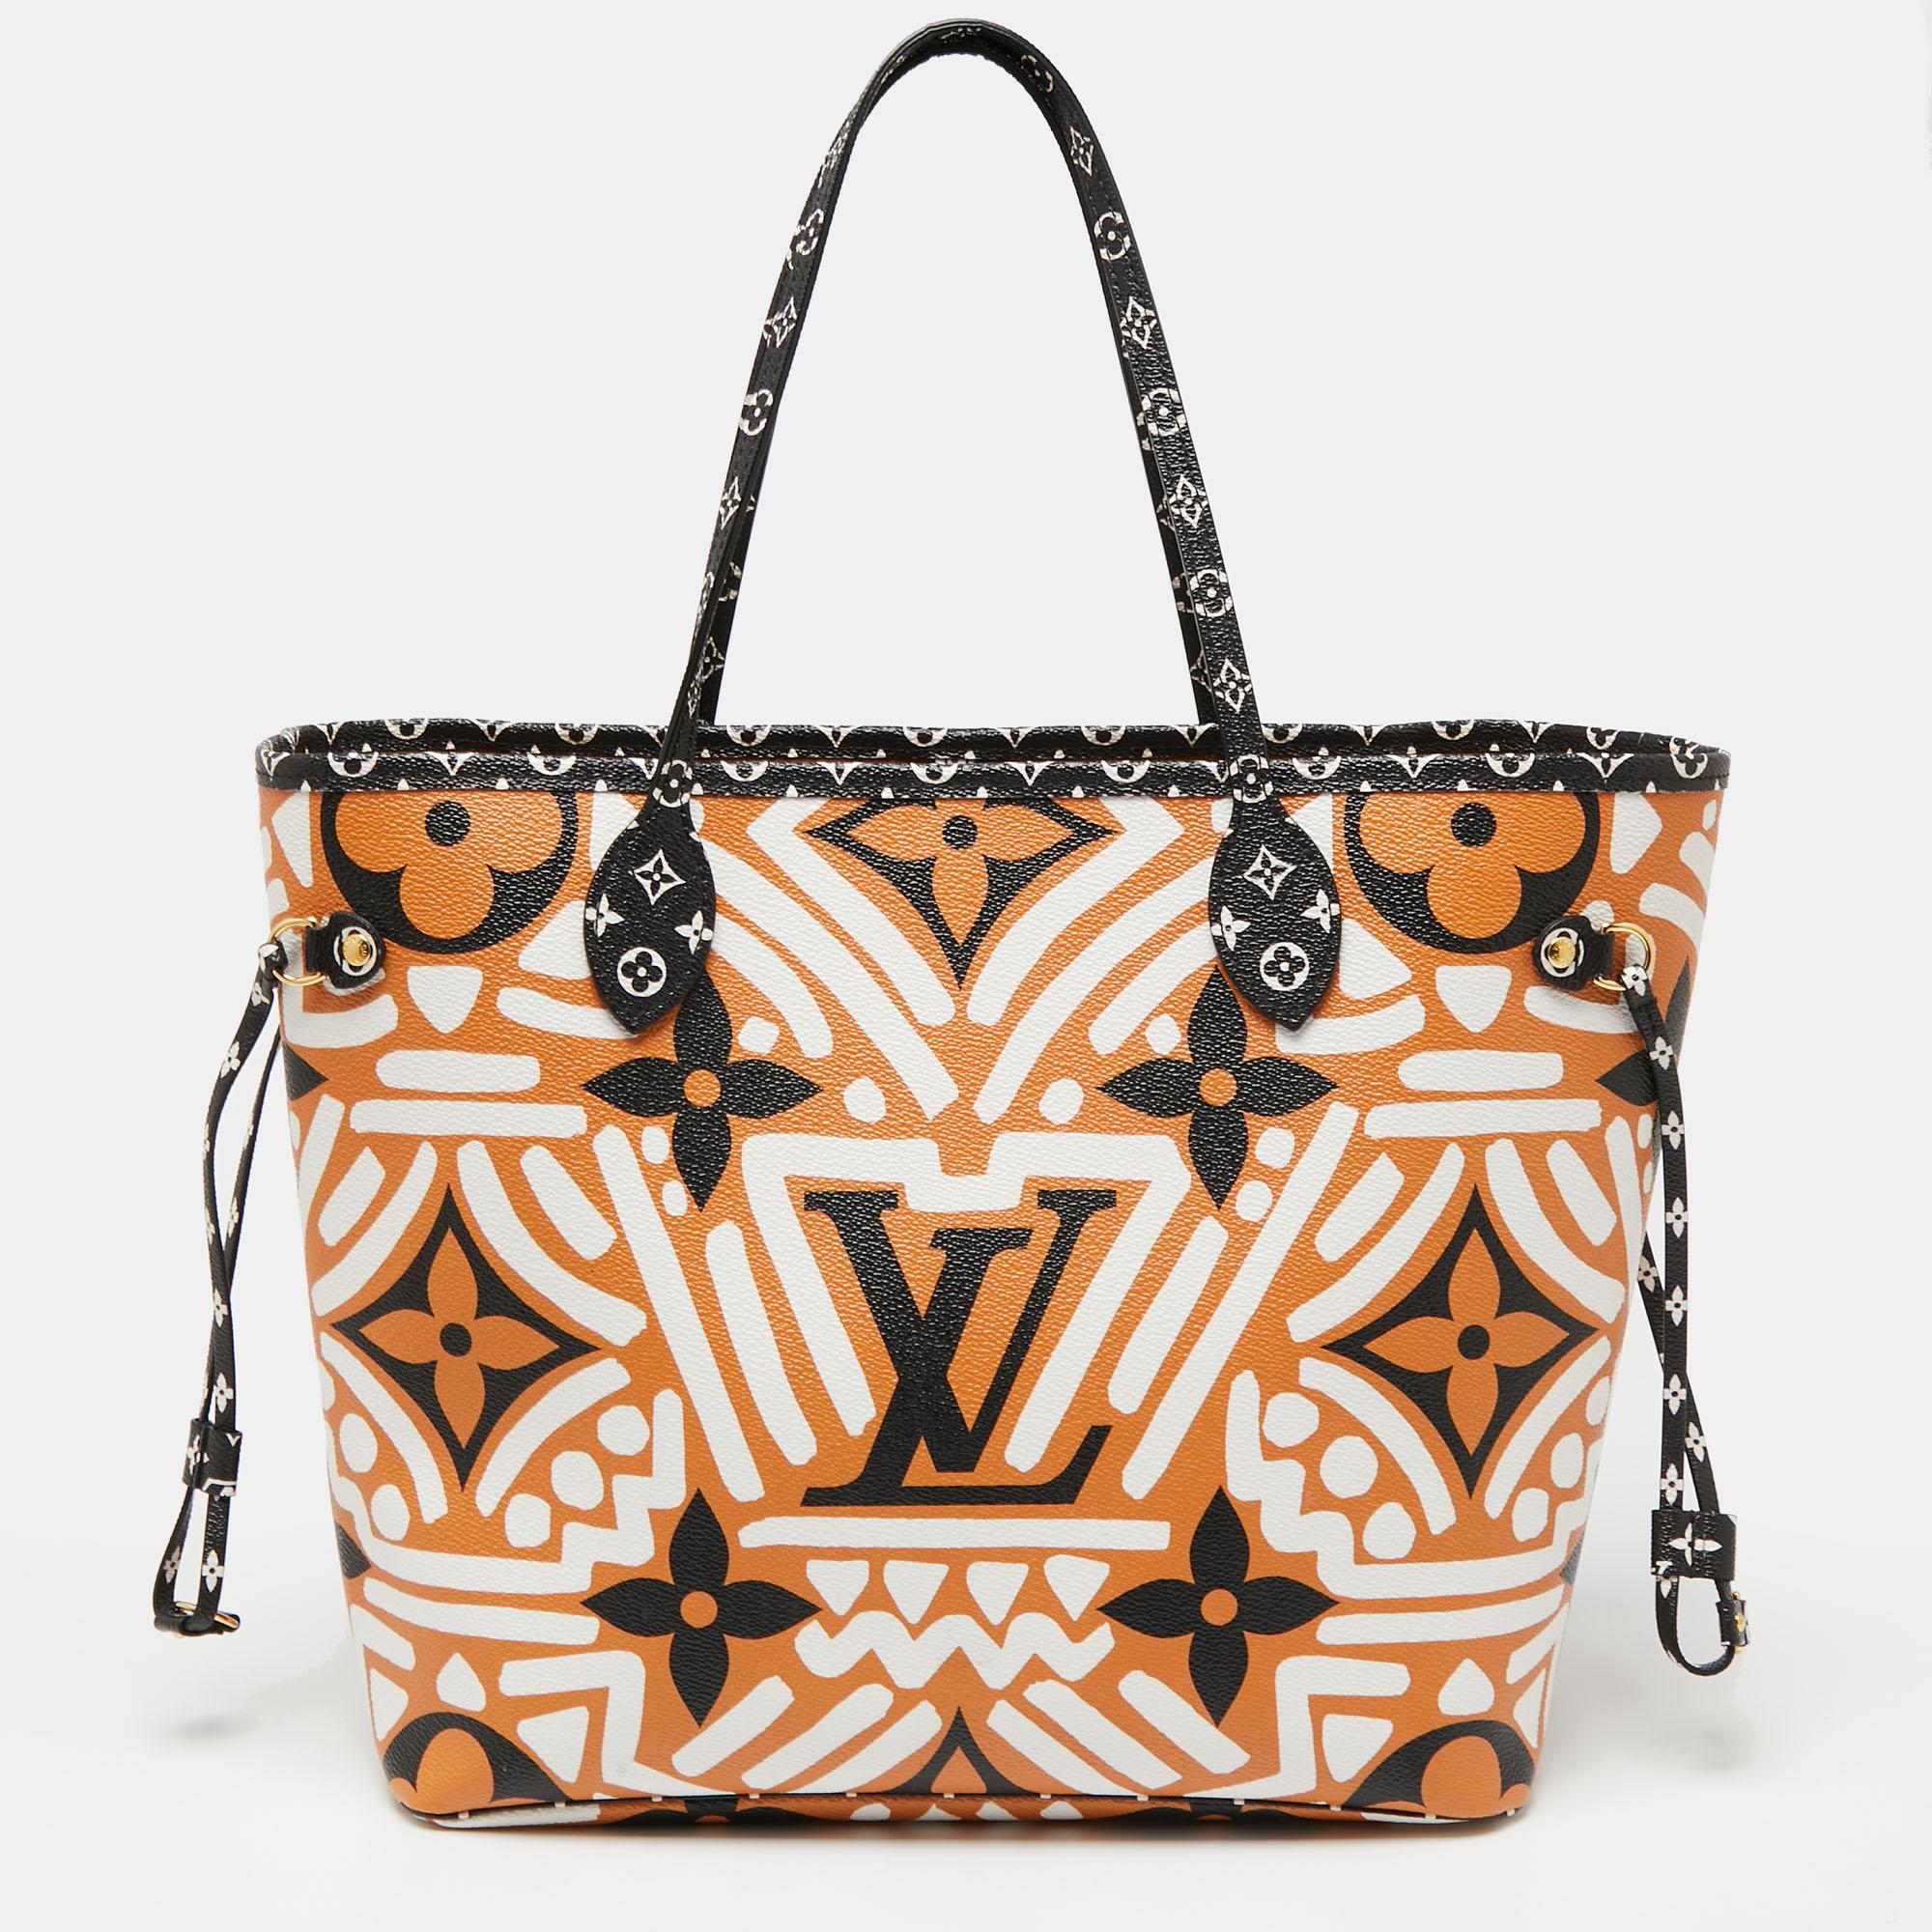 Introduced in 2007, the Neverfull by Louis Vuitton is applauded for its innovative design and faultless craftsmanship. This NM MM bag comes crafted from the signature monogram canvas, and its striking features contribute to its timeless elegance.